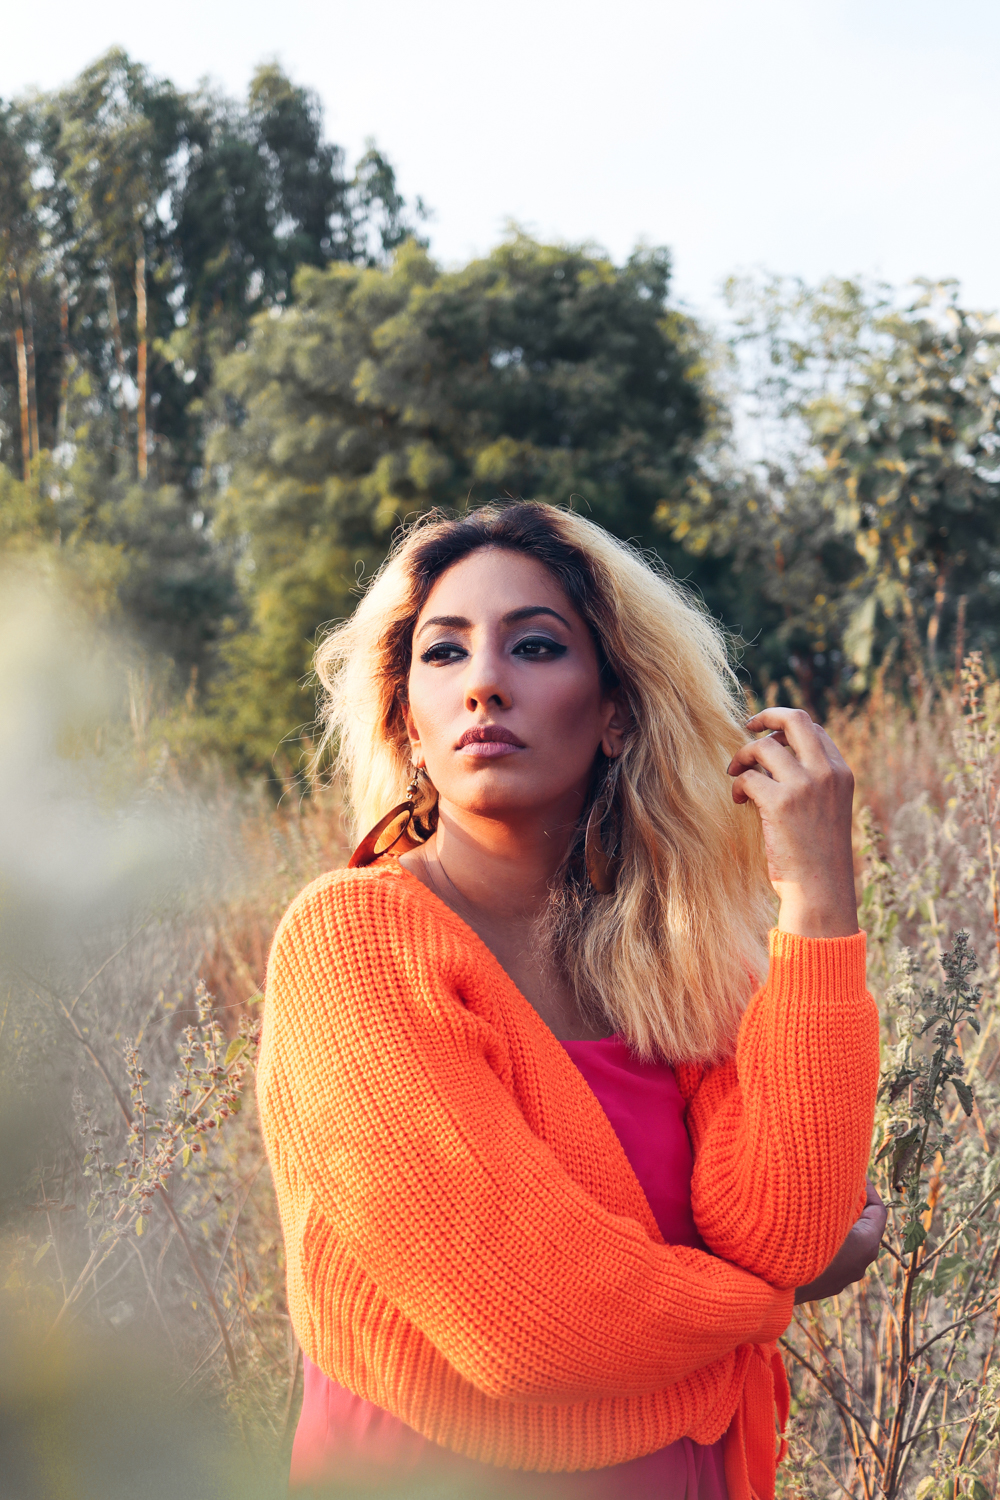 Orange Sweater ; Coral ; Hot Pink ; Maxi ; Winter Wear; Fall Fashion ; Layering ; Blonde ; Conceptual ; Winter Outfit ; Runway Fashion ; Color Pop ; fashion photography ; ootd ; fall look ; winter Fashion ; zaful ; fall 18 ; Hyderabad ; Editorial ; Naznin ; Naznin Suhaer ; dusky; model ; indian blogger ; hyderabad fashion bloggers ; hyderabad bloggers ; hyderabad fashion blogger ; I Dress for the Applause ; 